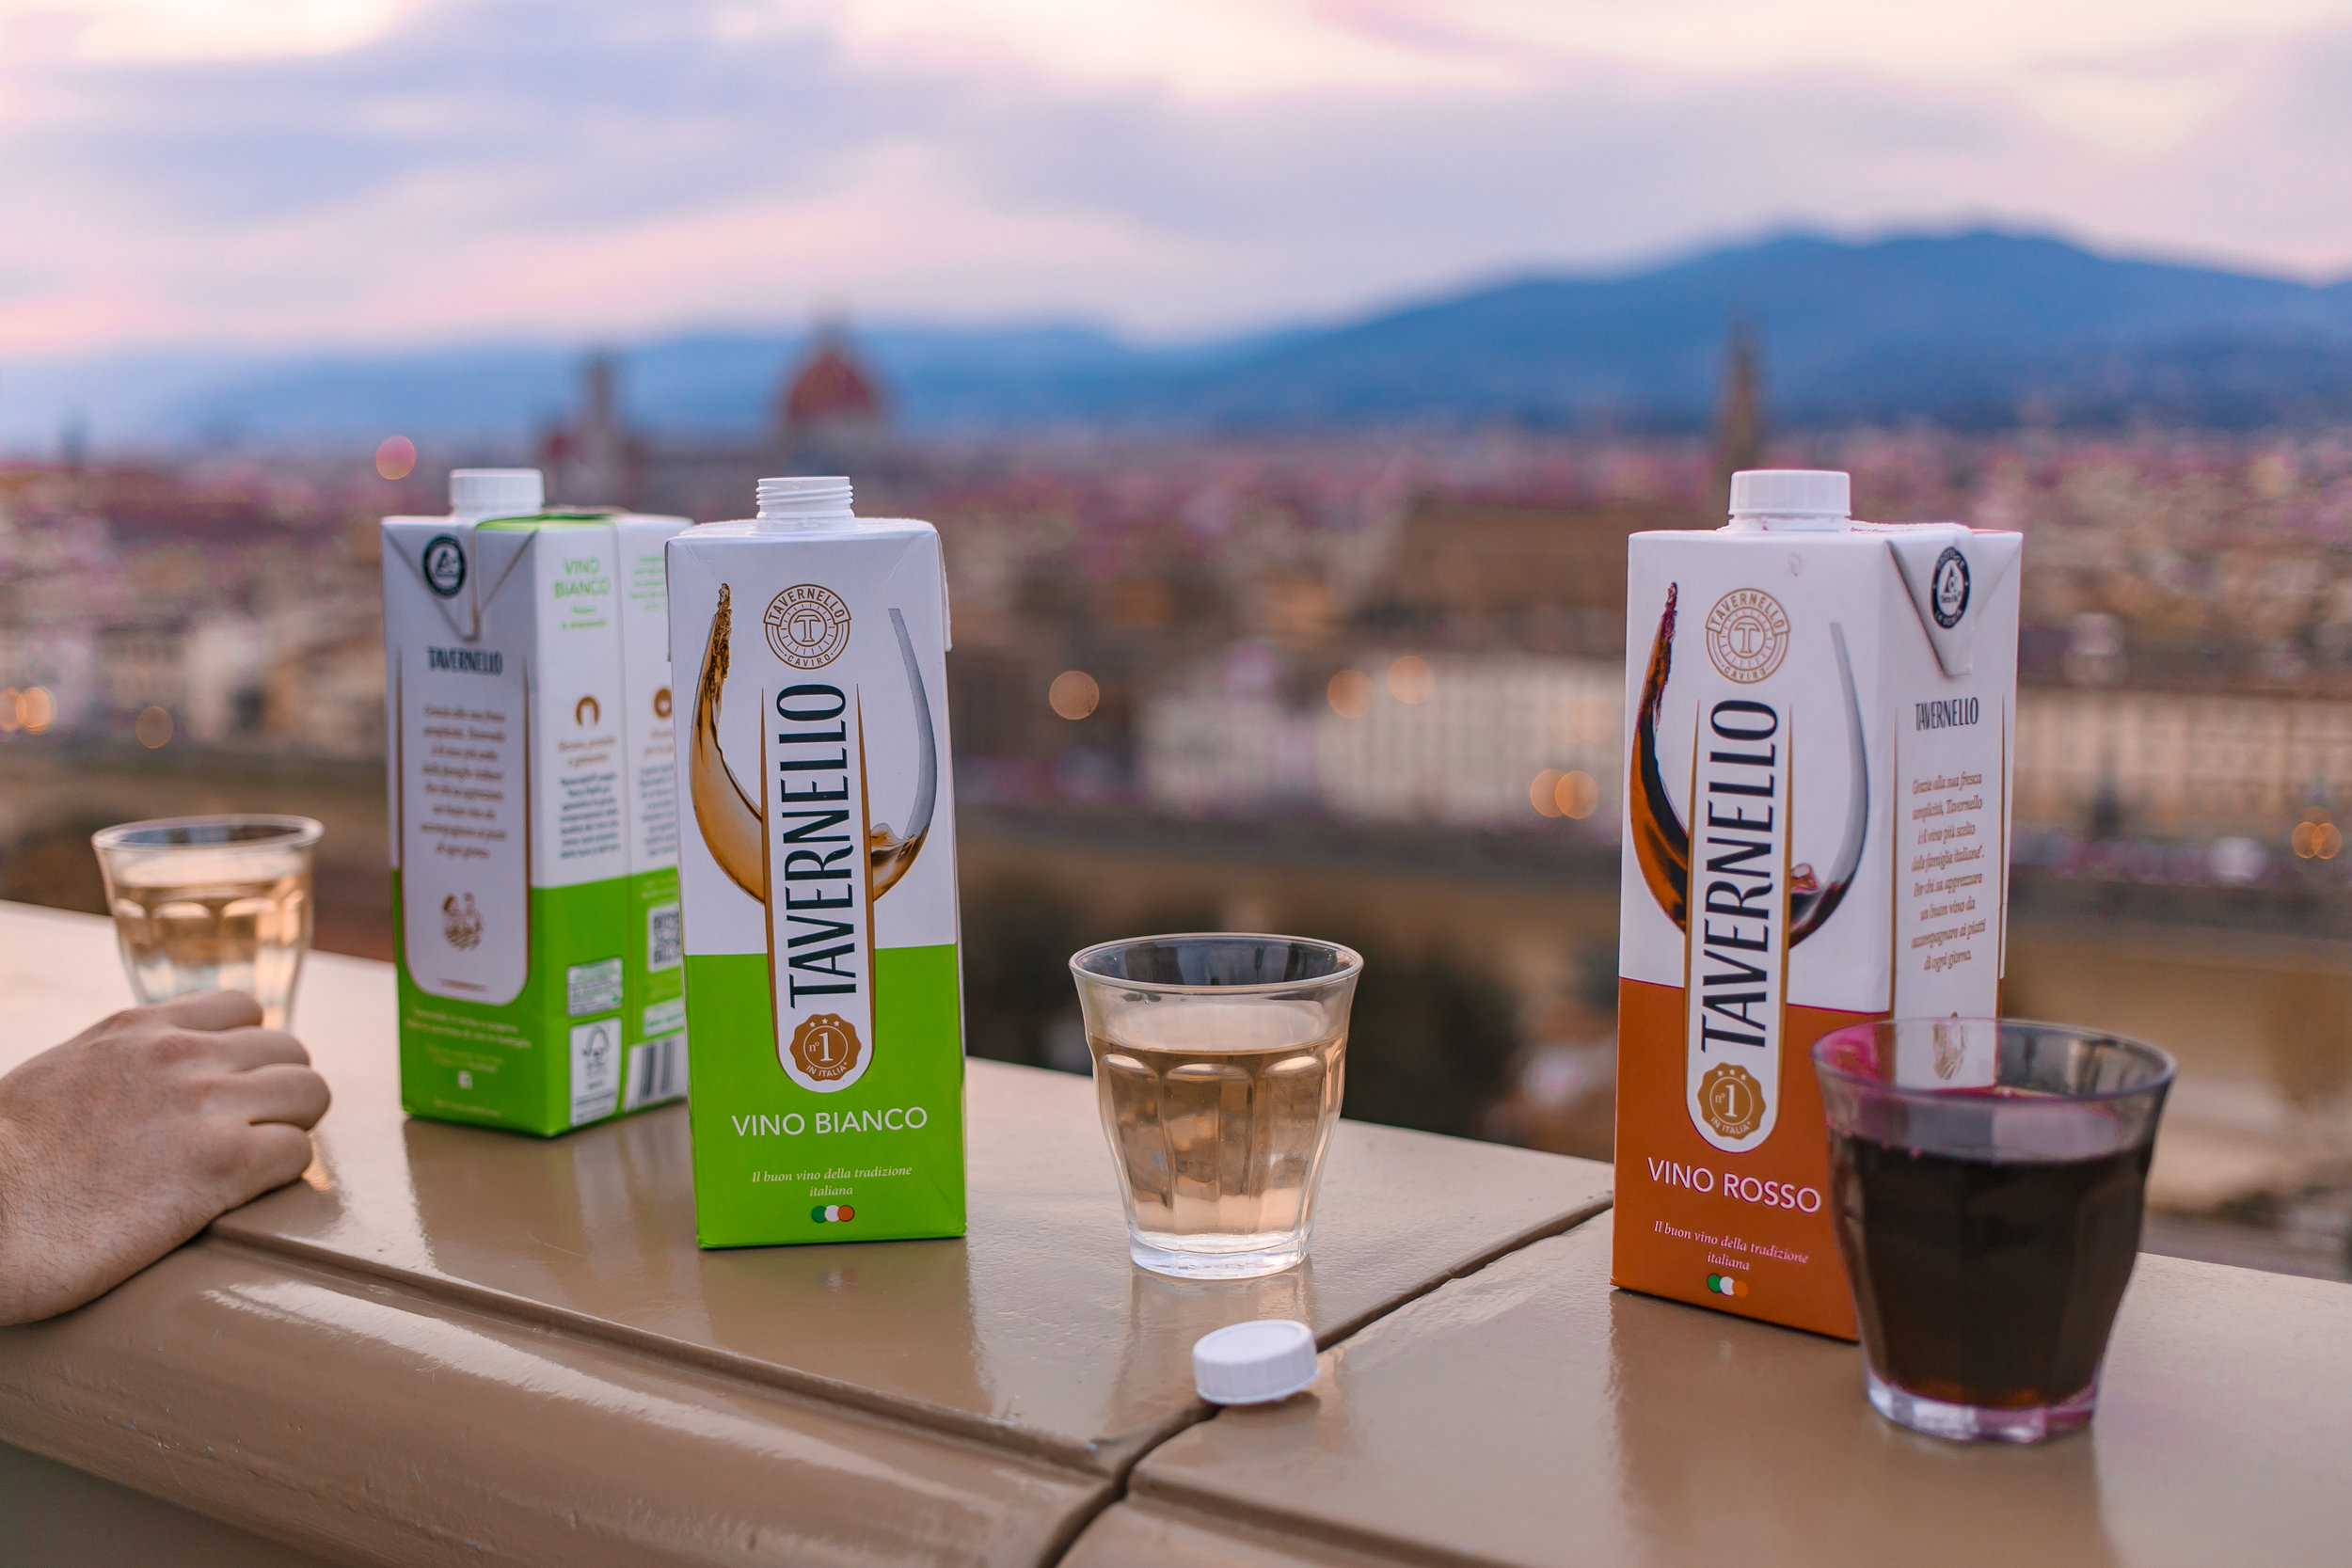  Watching the sunset with snacks and drinks at Piazzale Michelangelo, one of the best things to do in Florence!  